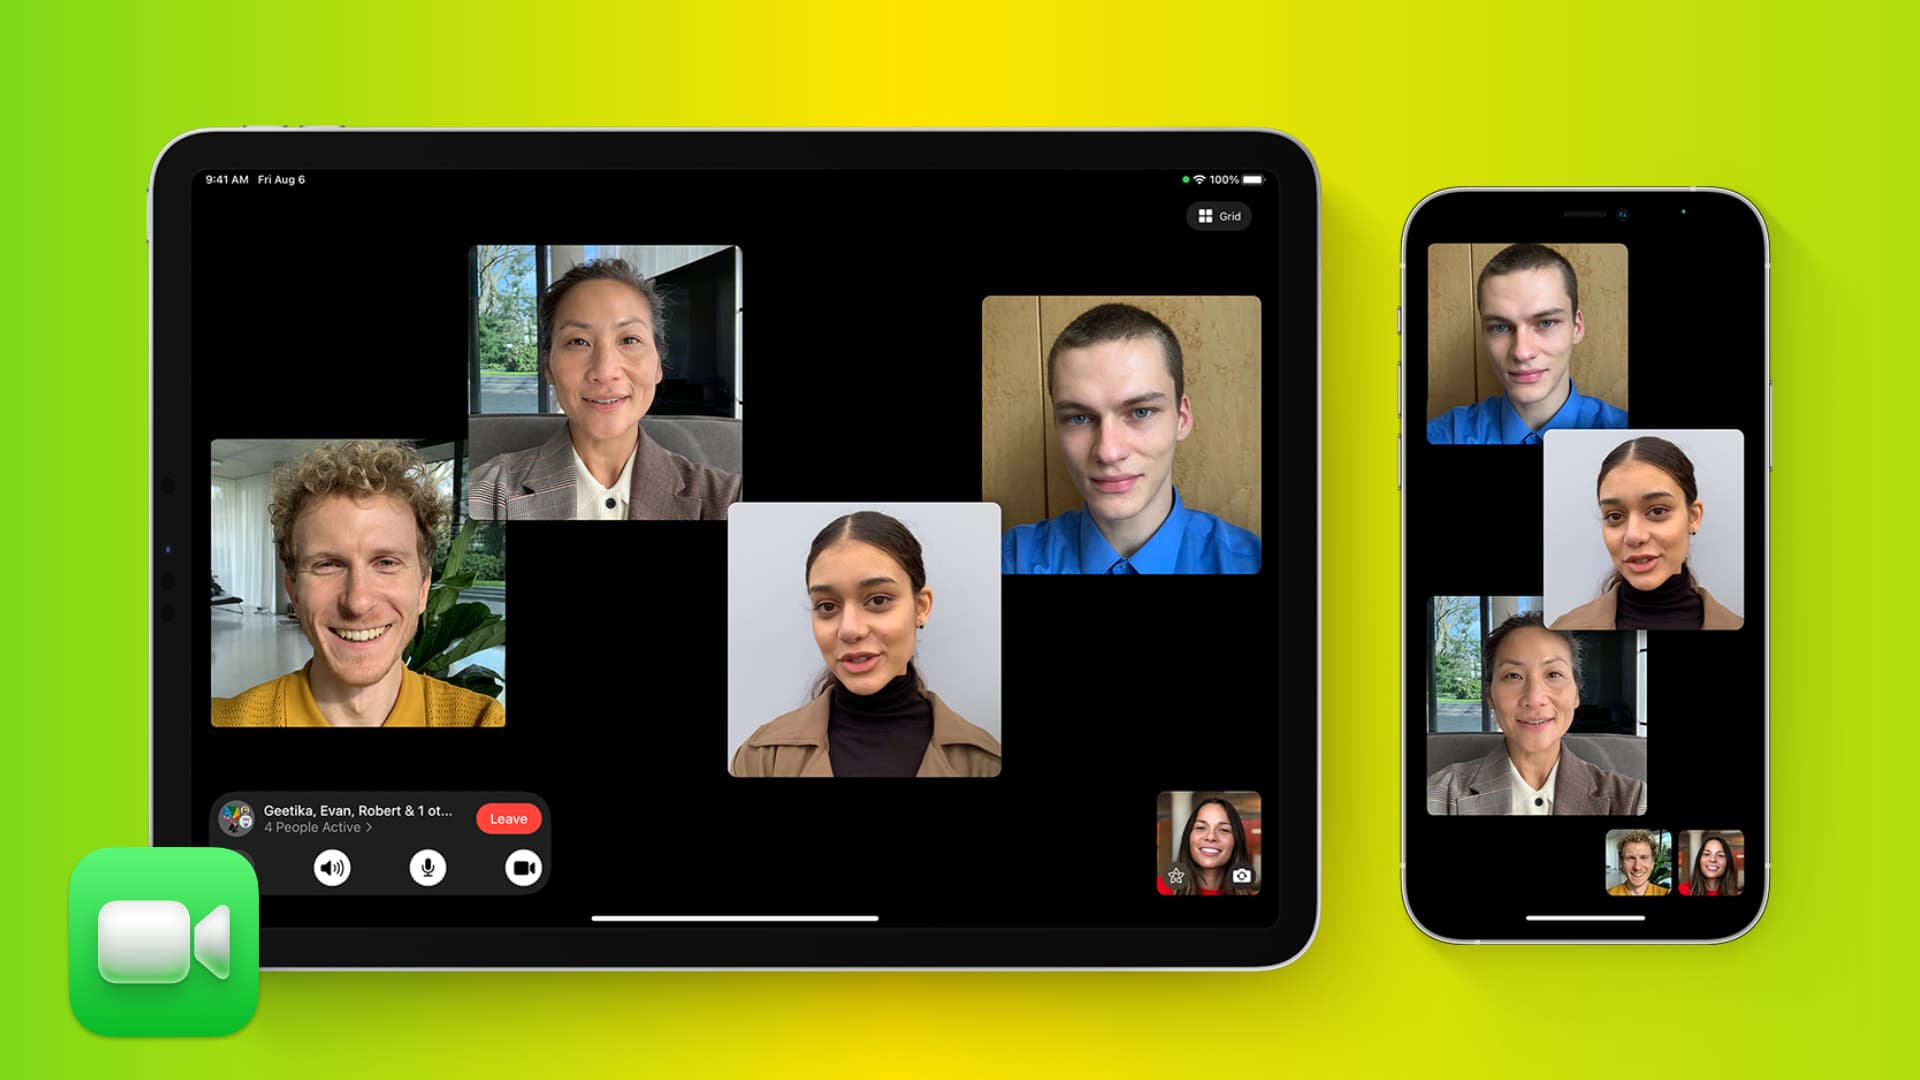 Group FaceTime video call on iPad and iPhone